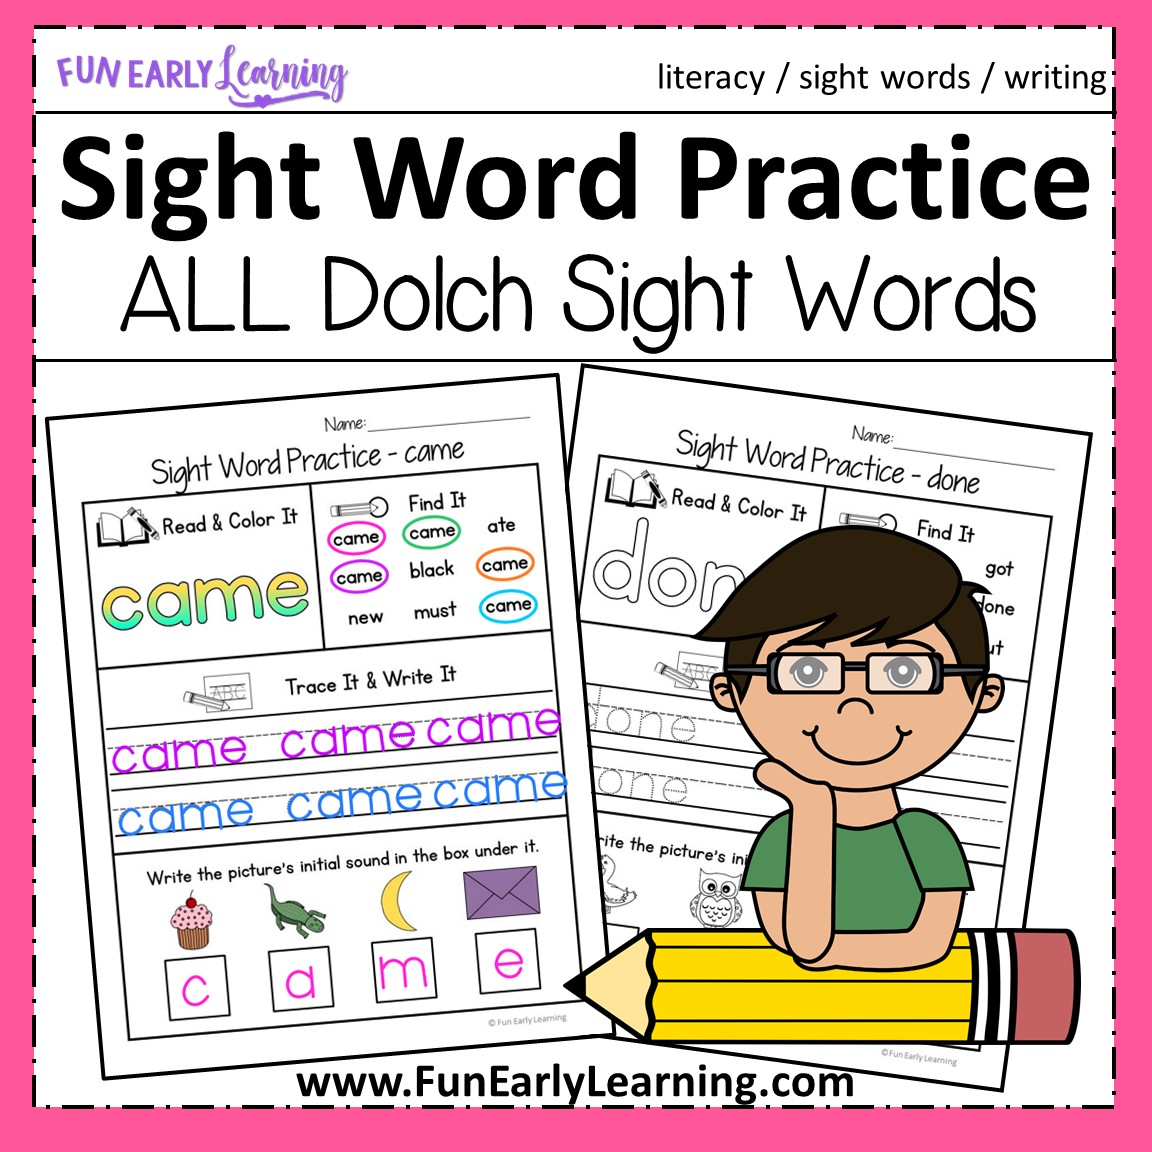 kinder dolch sight words